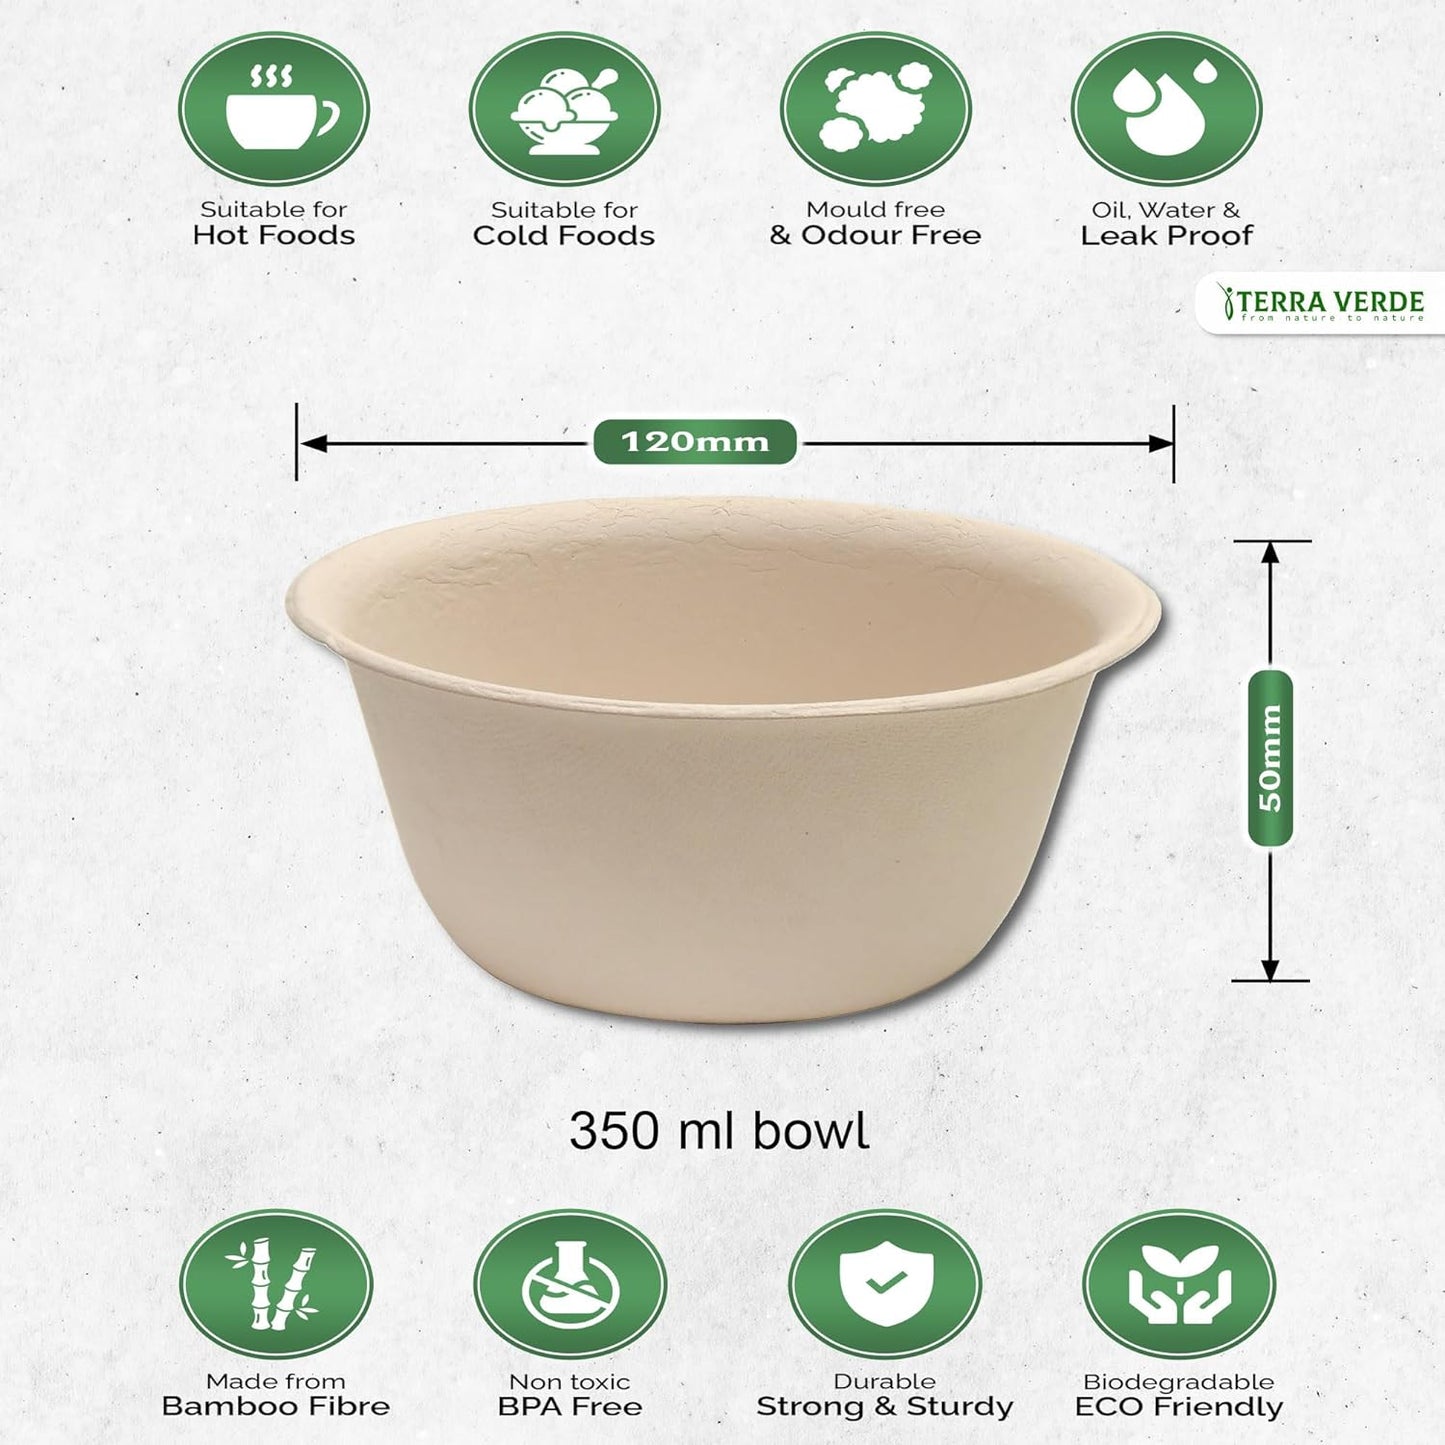 Disposable Bamboo Fibre Paper Dessert Bowls l 350ml Unbleached Natural Brown l Pack of 50 l 100% Compostable Biodegradable Eco Friendly Extra Strong for Salad, Soup, Hot/Cold Food, Snacks